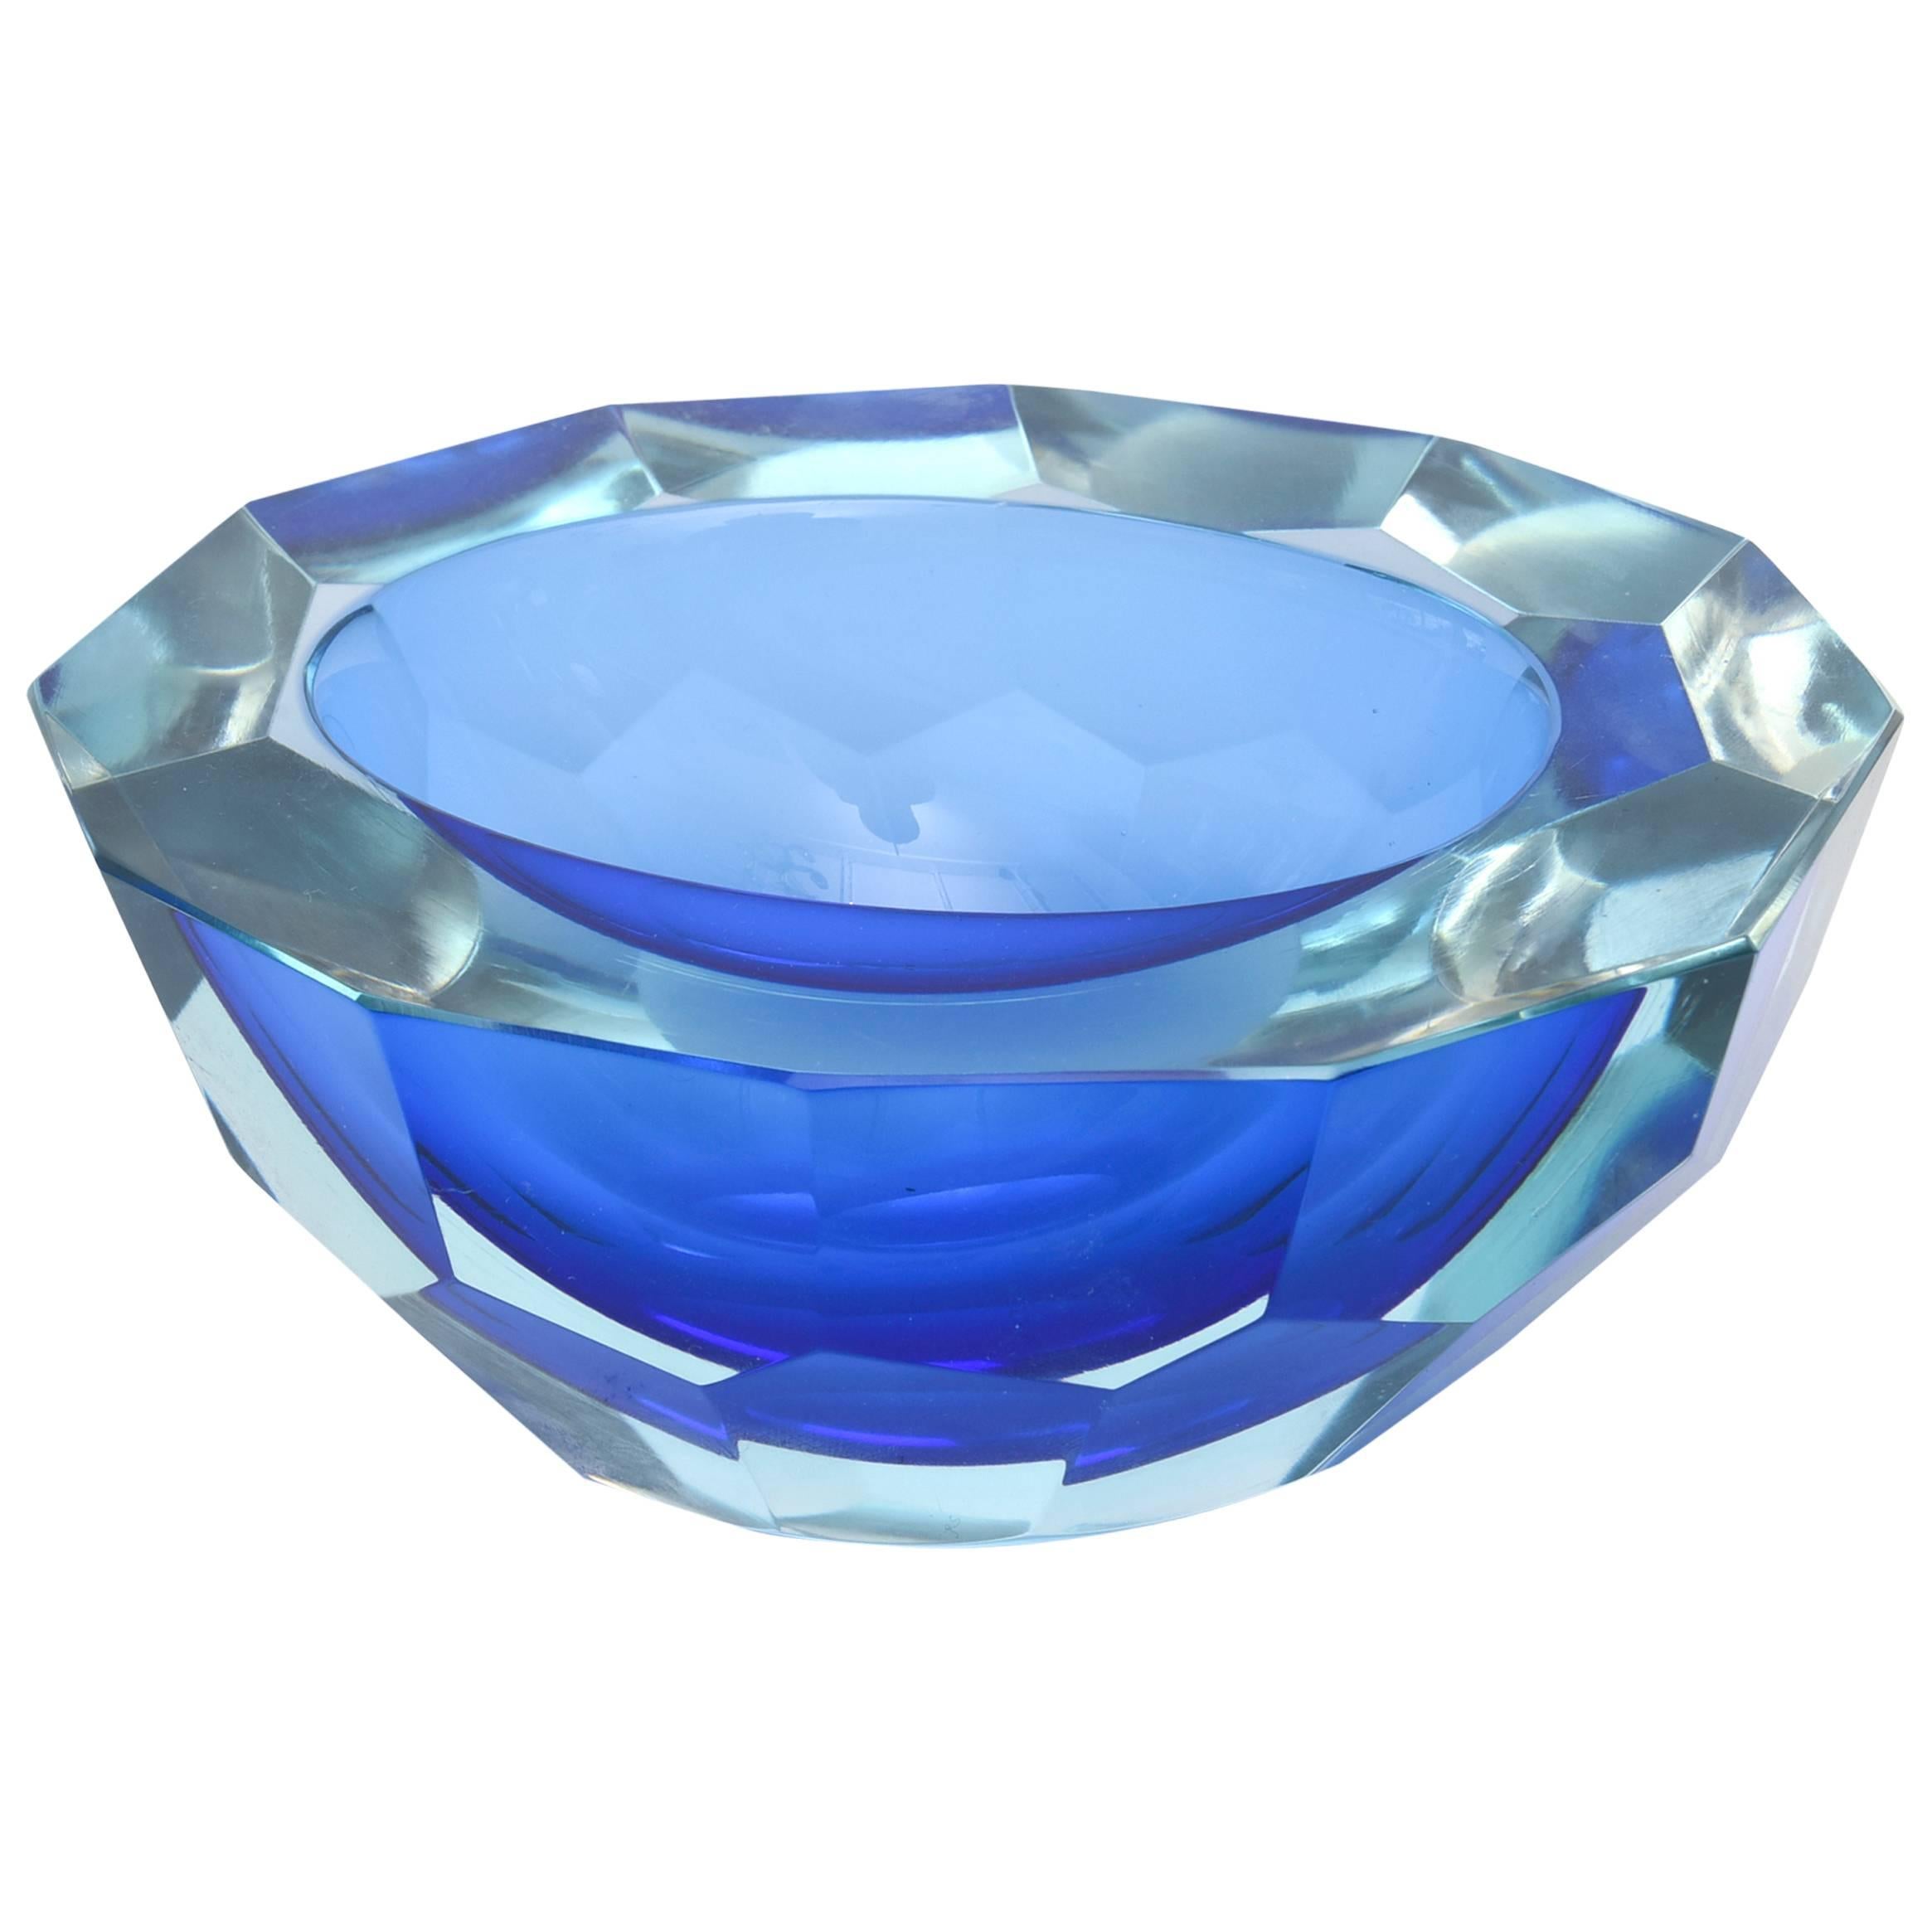 Italian Murano Sommerso Diamond Faceted Flat Cut Polished Glass Geode Bowl